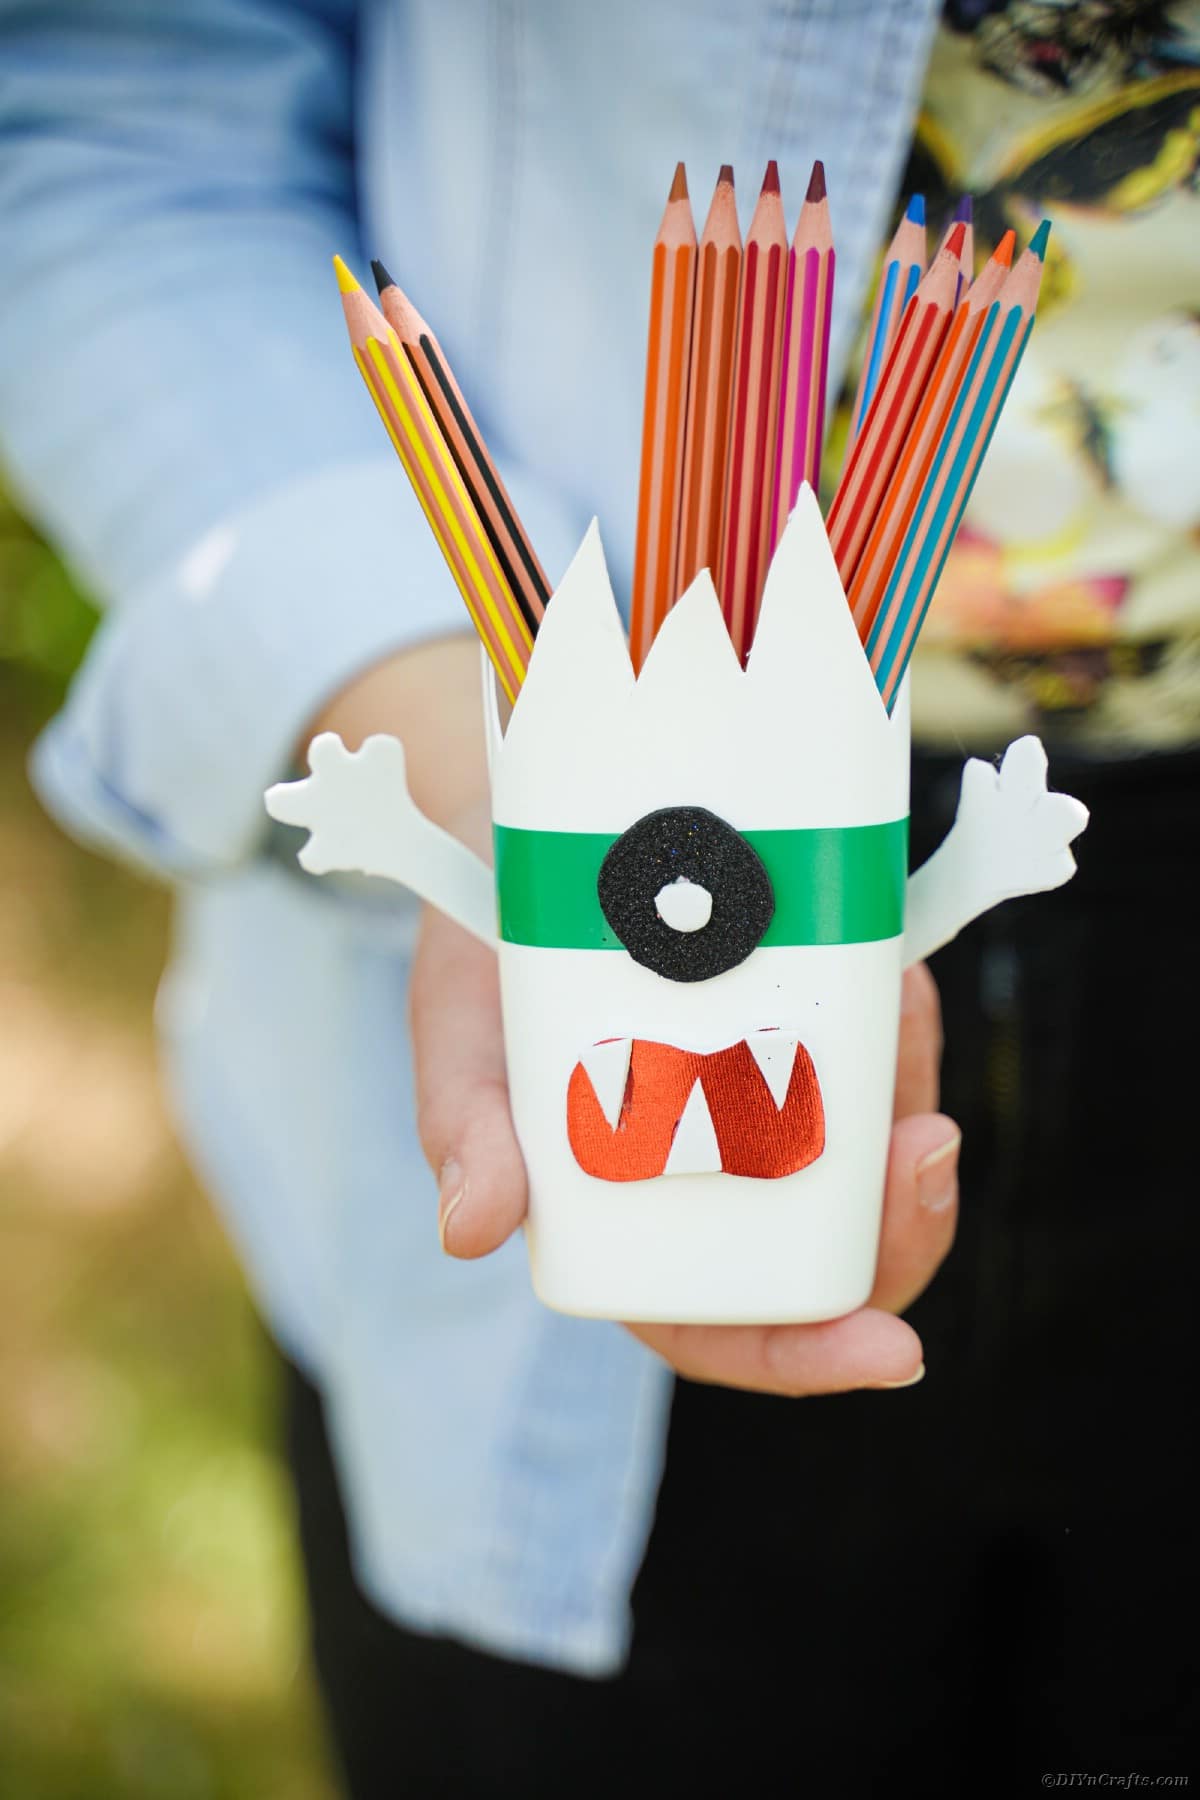 Woman holding monster pencil cans